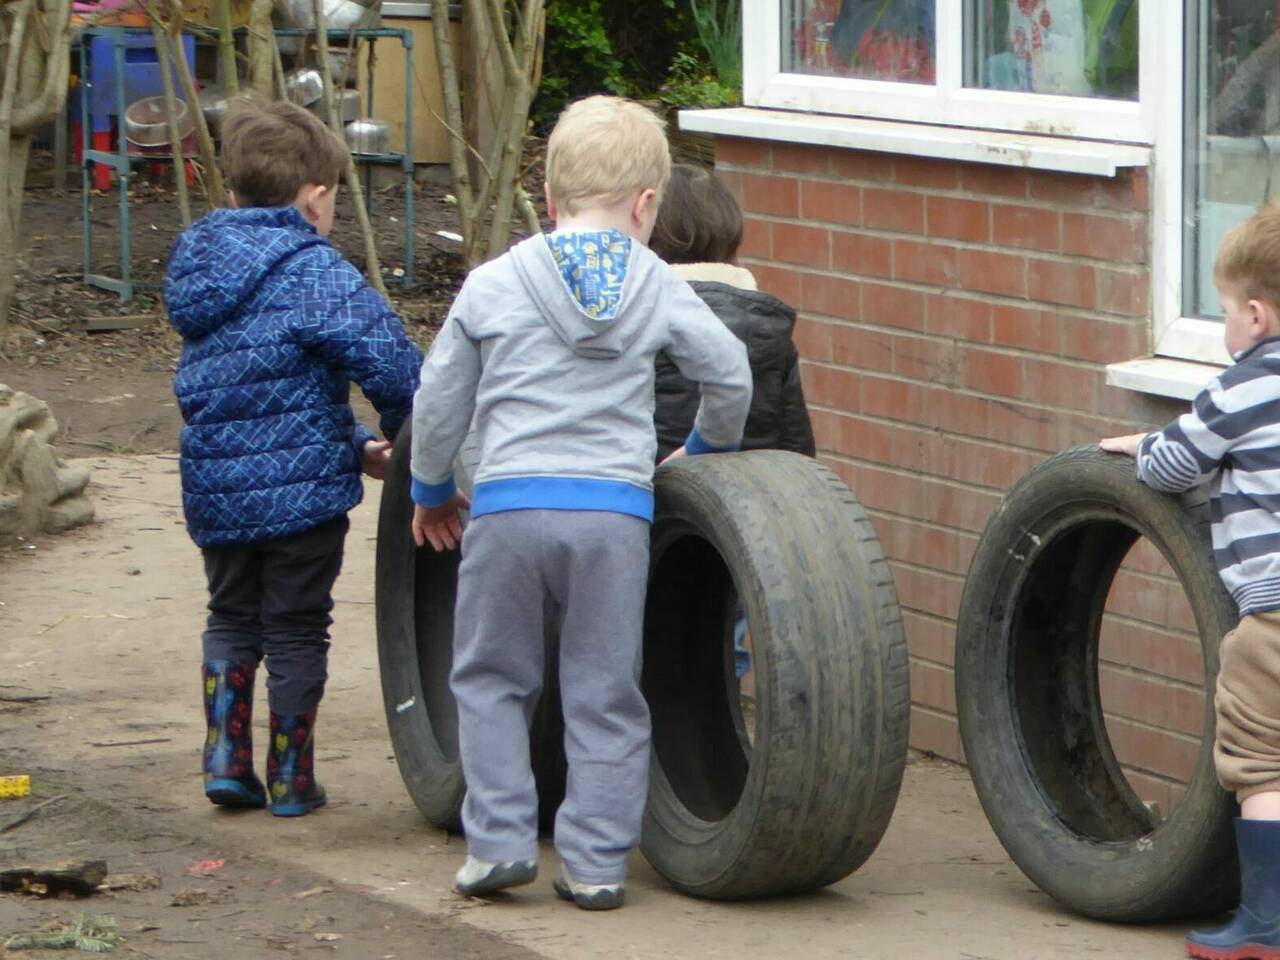 Boys with tyres